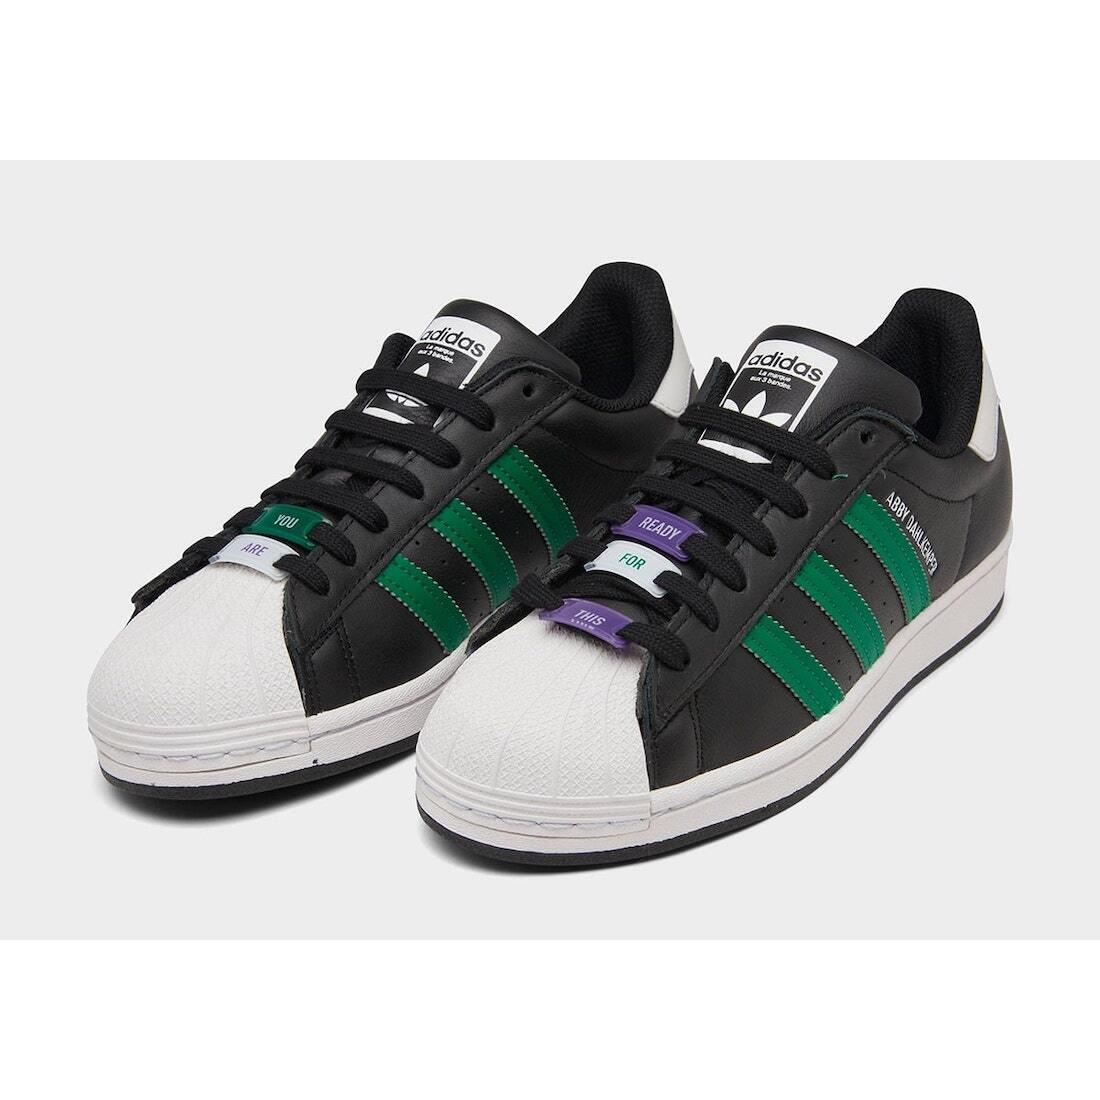 Adidas shoes SUPERSTAR - Core Black / Bold Green / Active 1